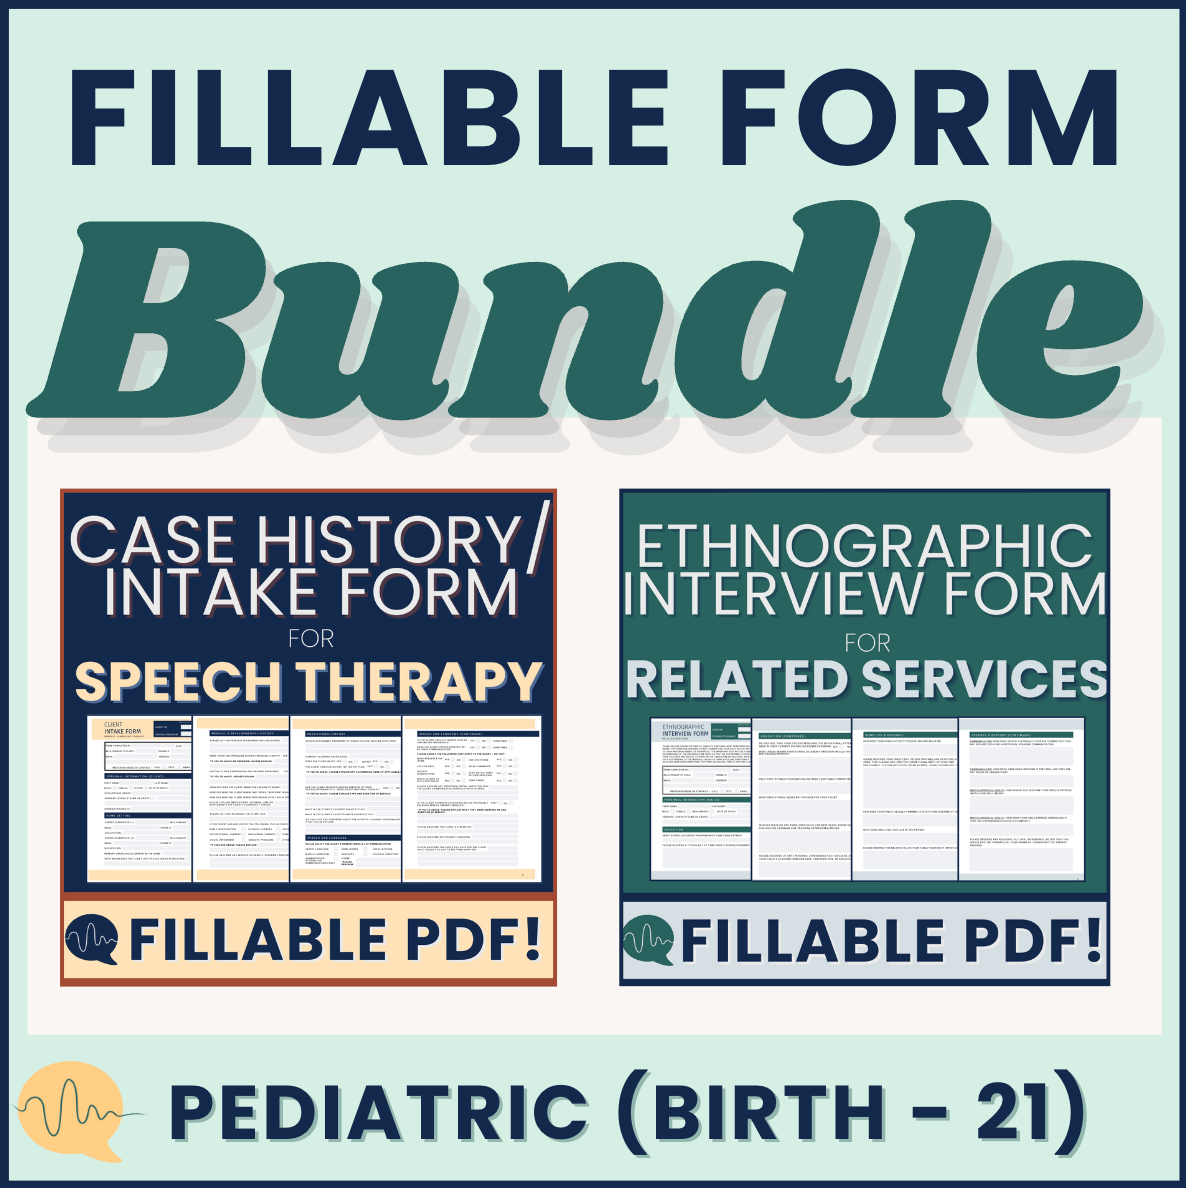 Case History and Ethnographic Interview BUNDLE for Speech Therapy: FILLABLE PDFs